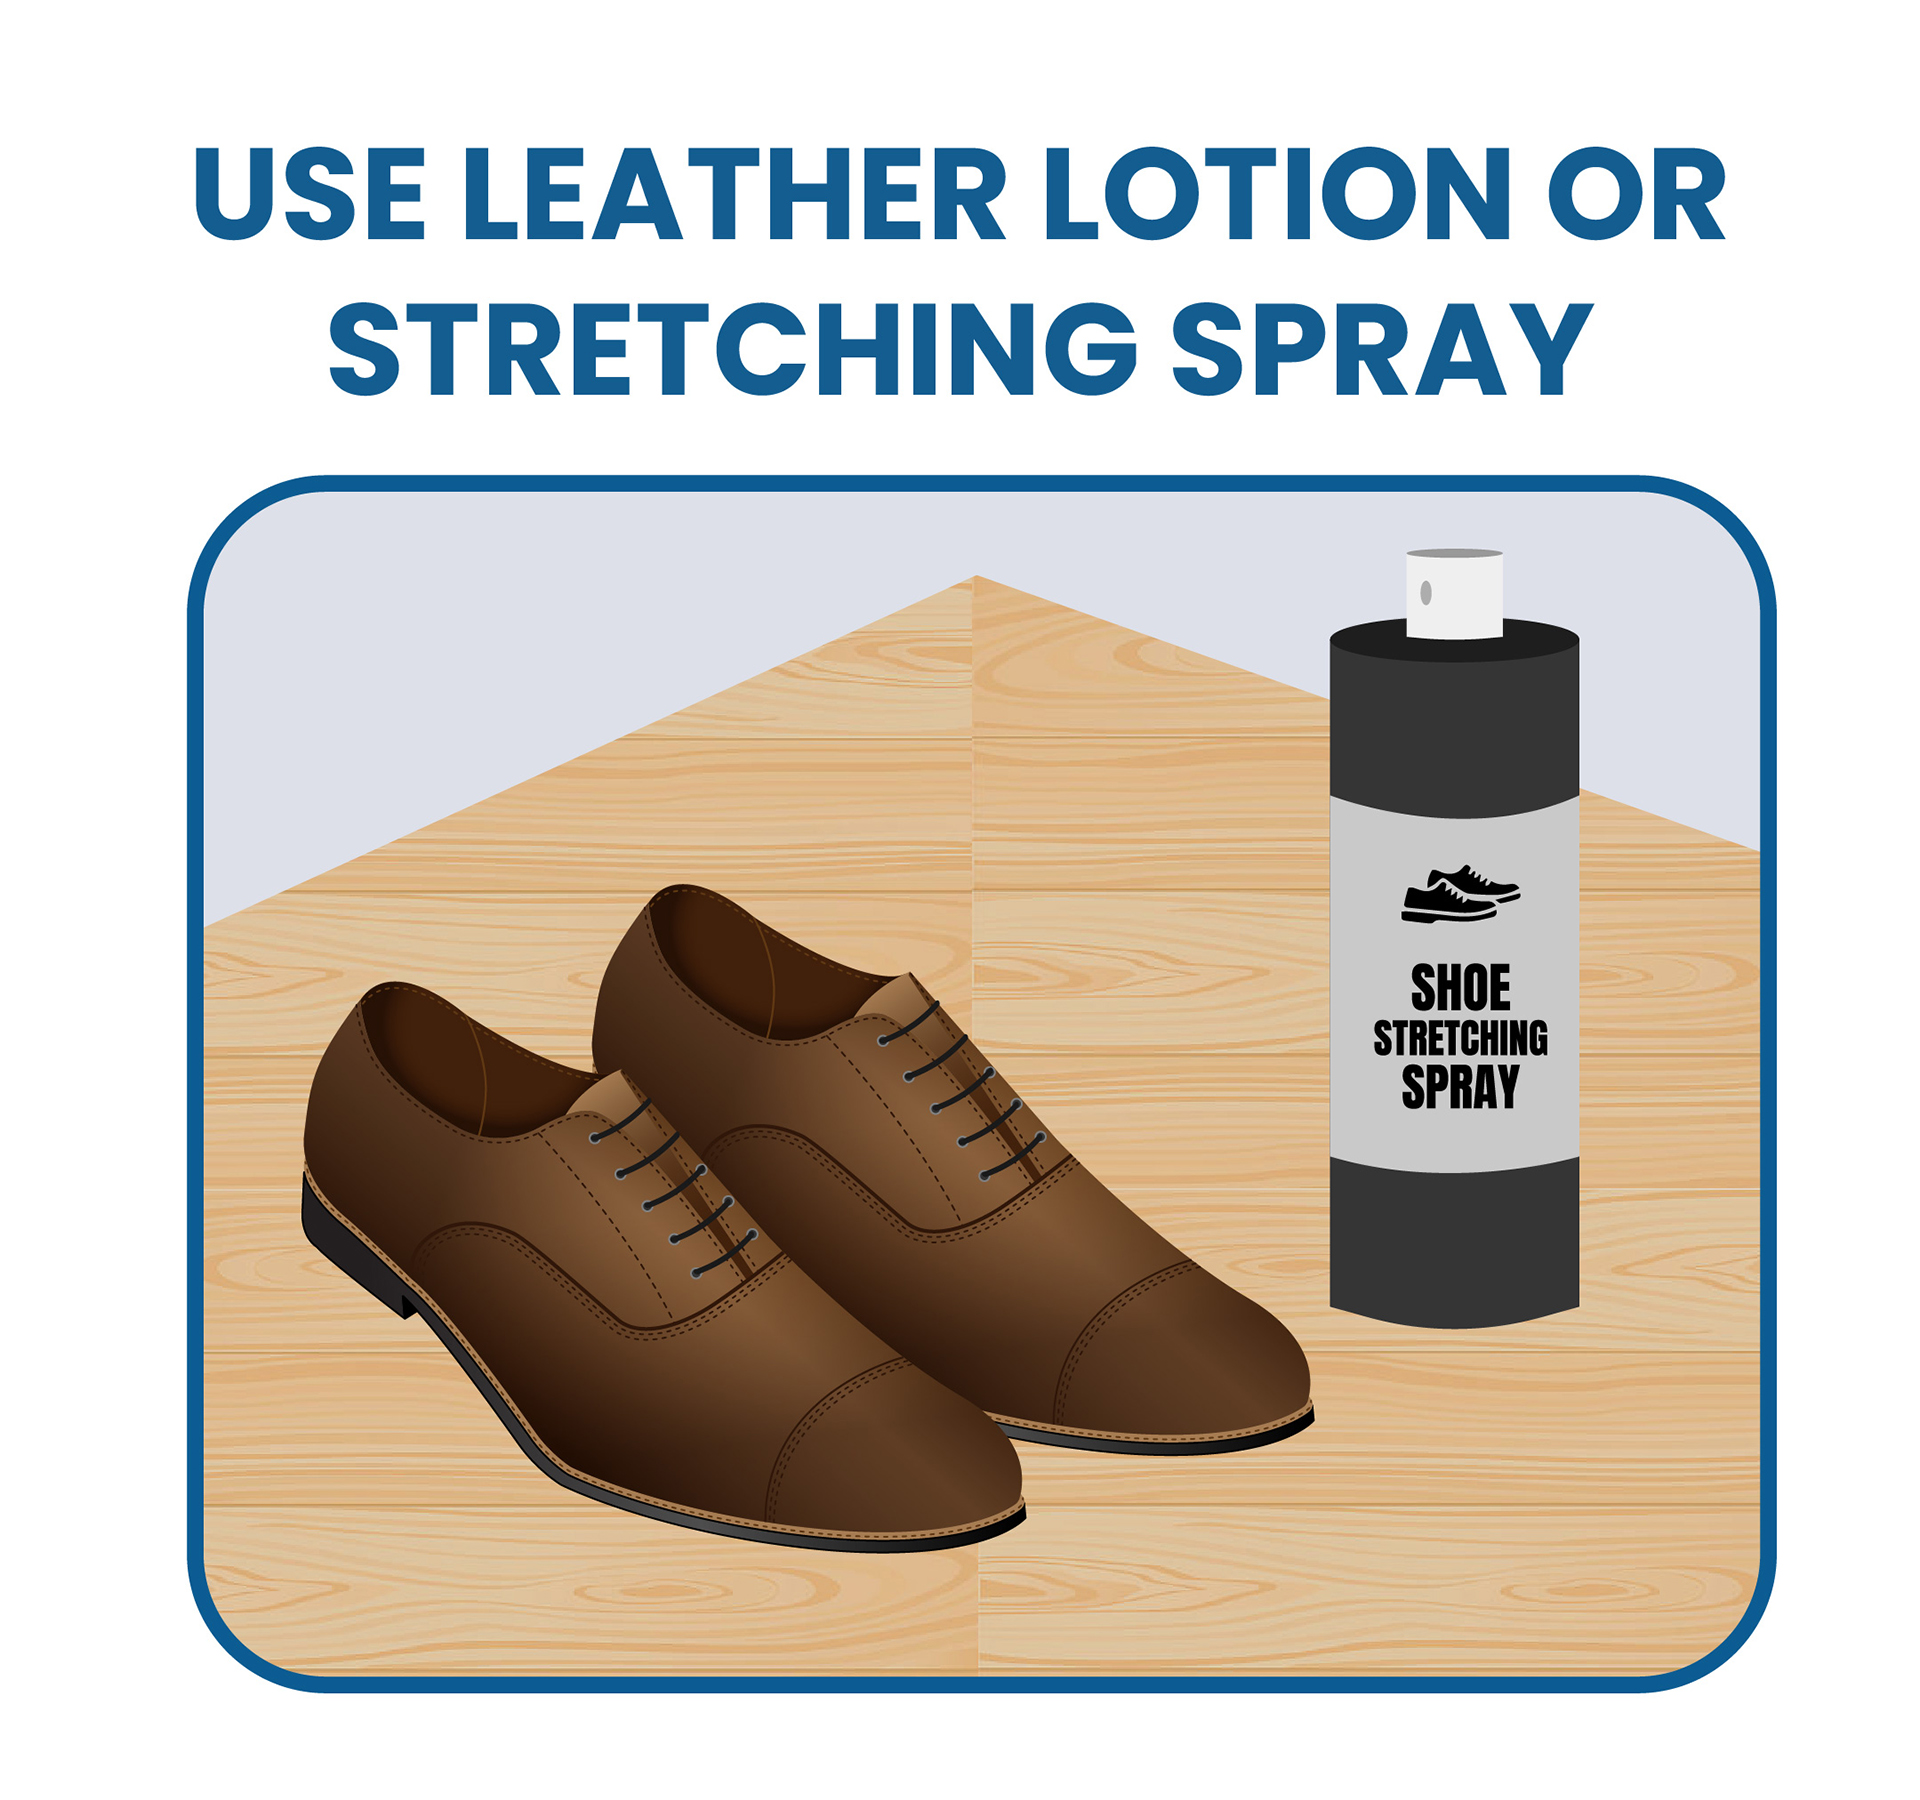 dress shoes and leather lotion